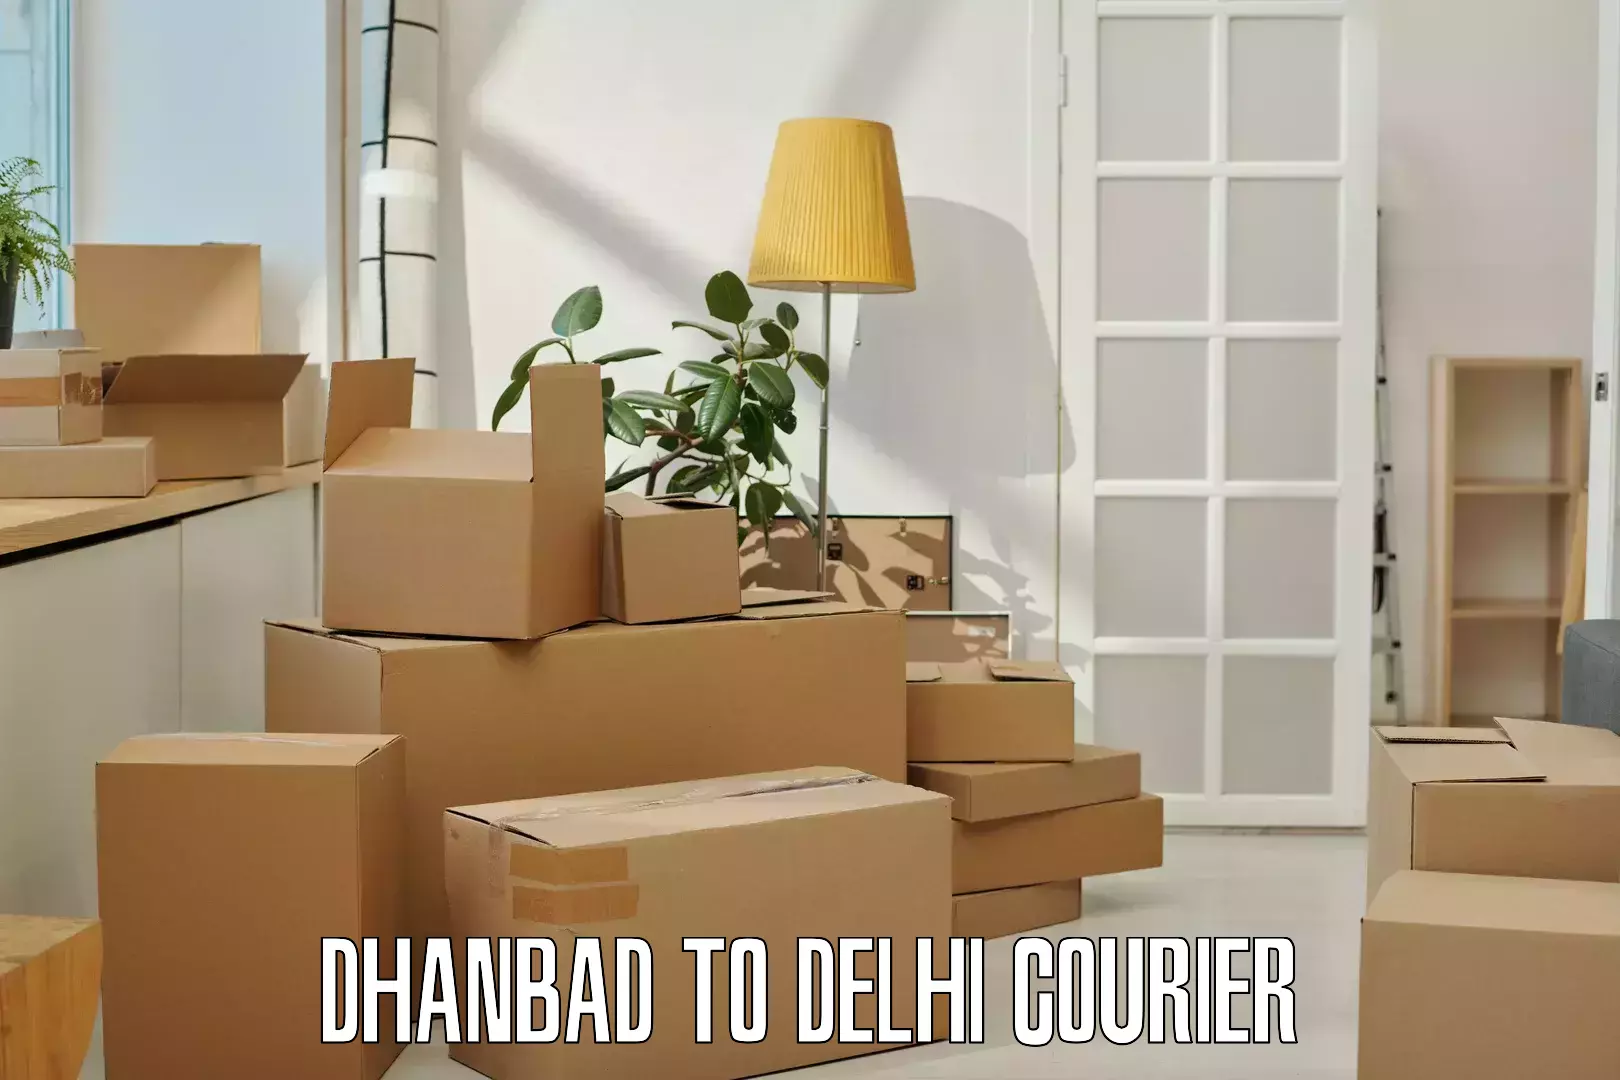 Ocean freight courier Dhanbad to NCR